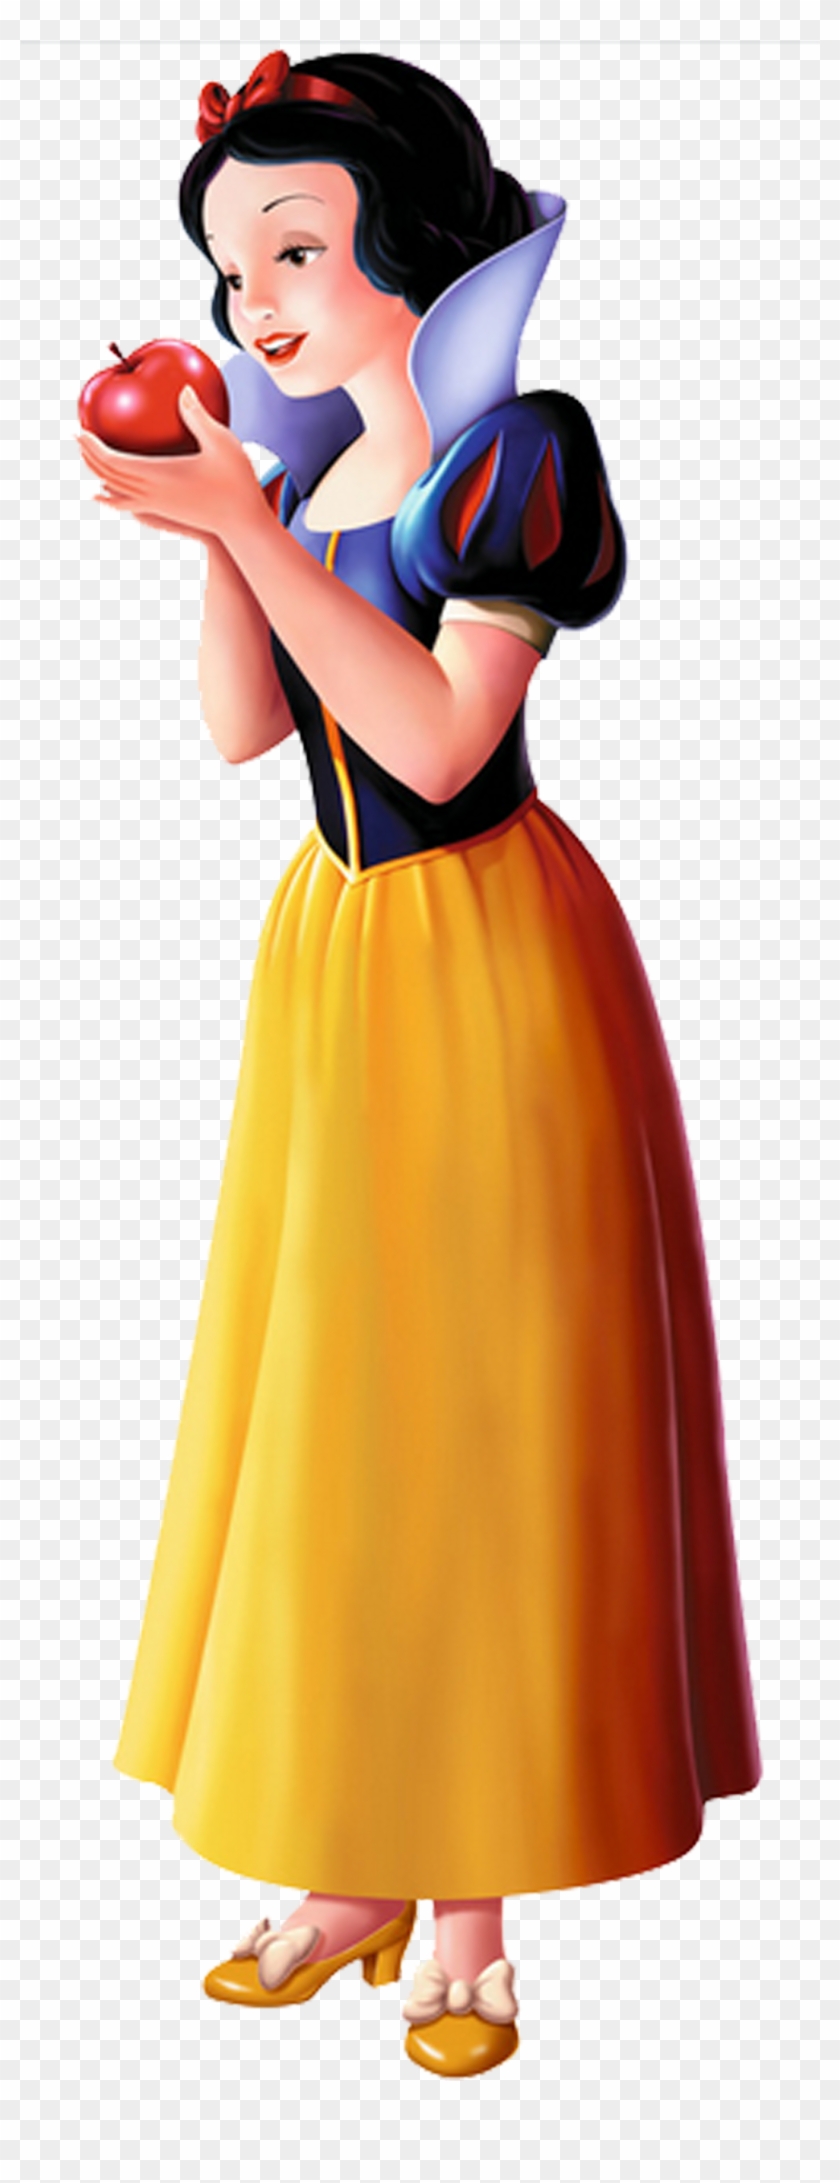 Snow White Png Pic - Snow White And Apple #414070